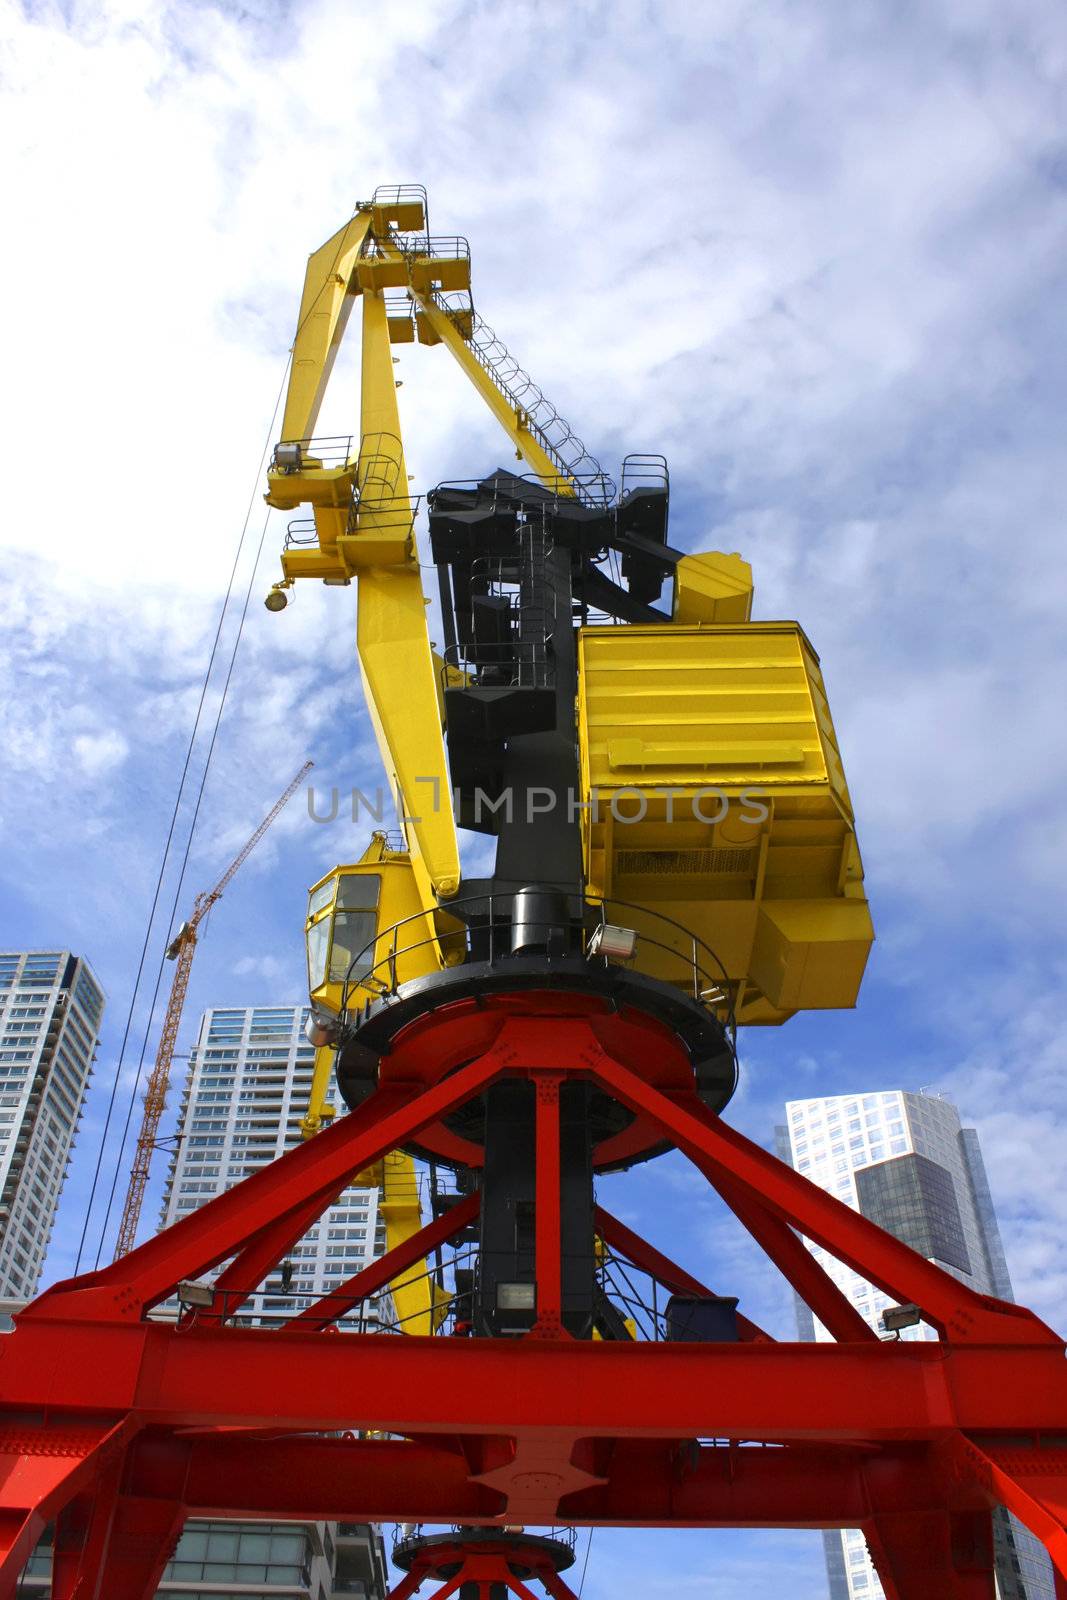 A crane in Puerto Madero, Buenos Aires.